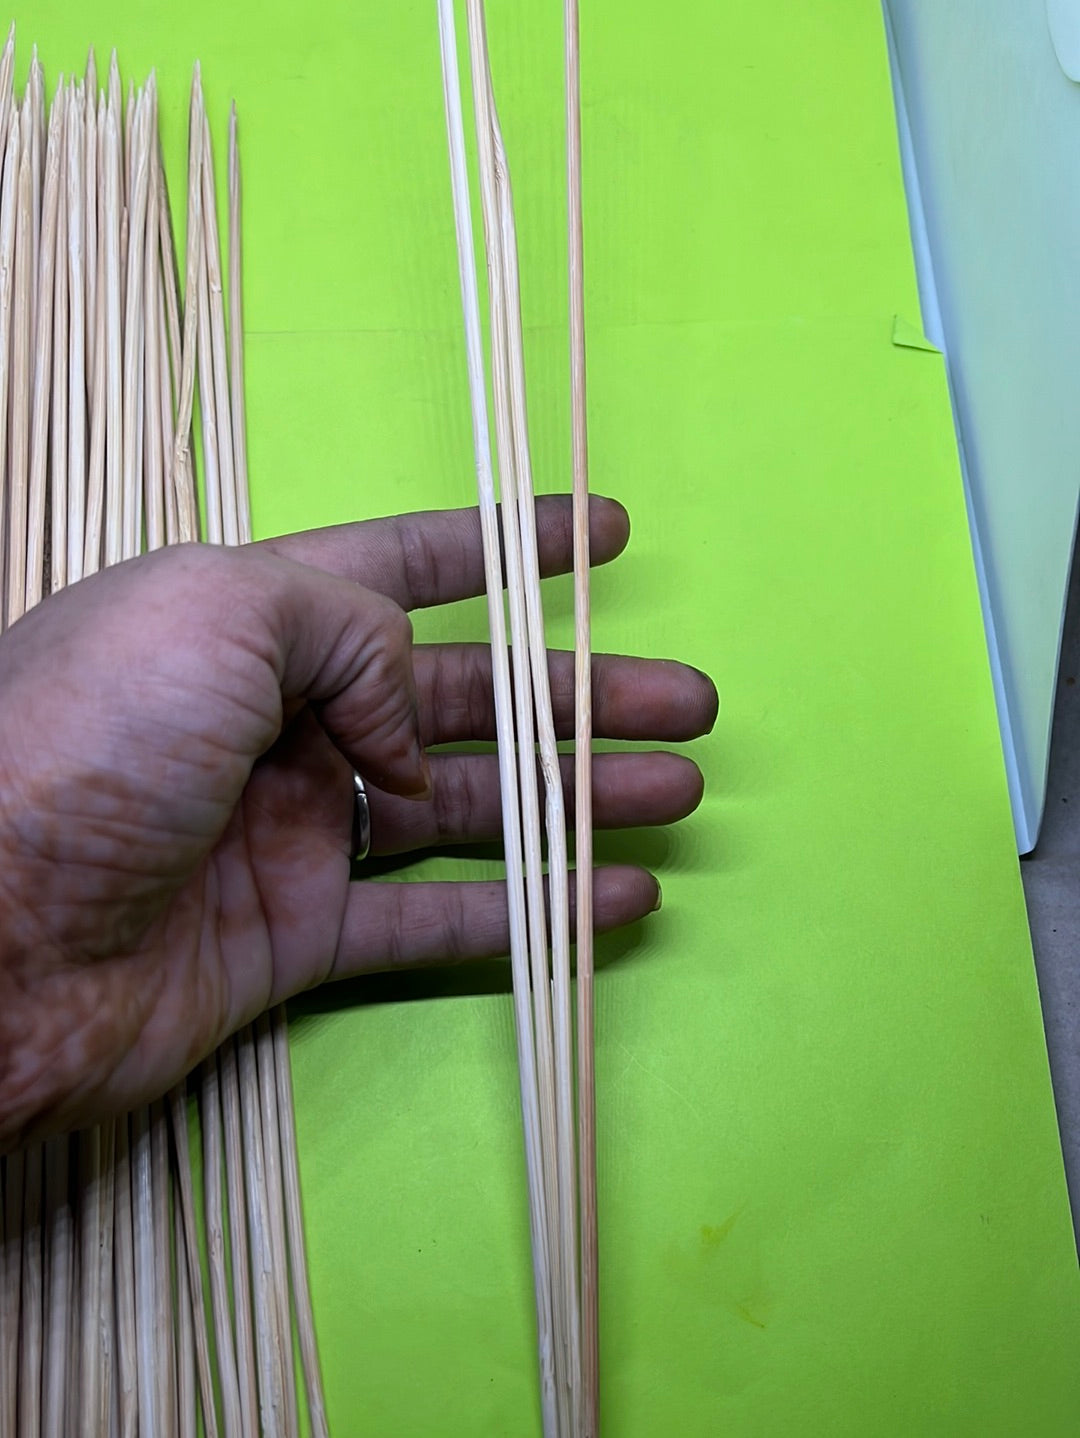 Bamboo skewers for wooden sticks